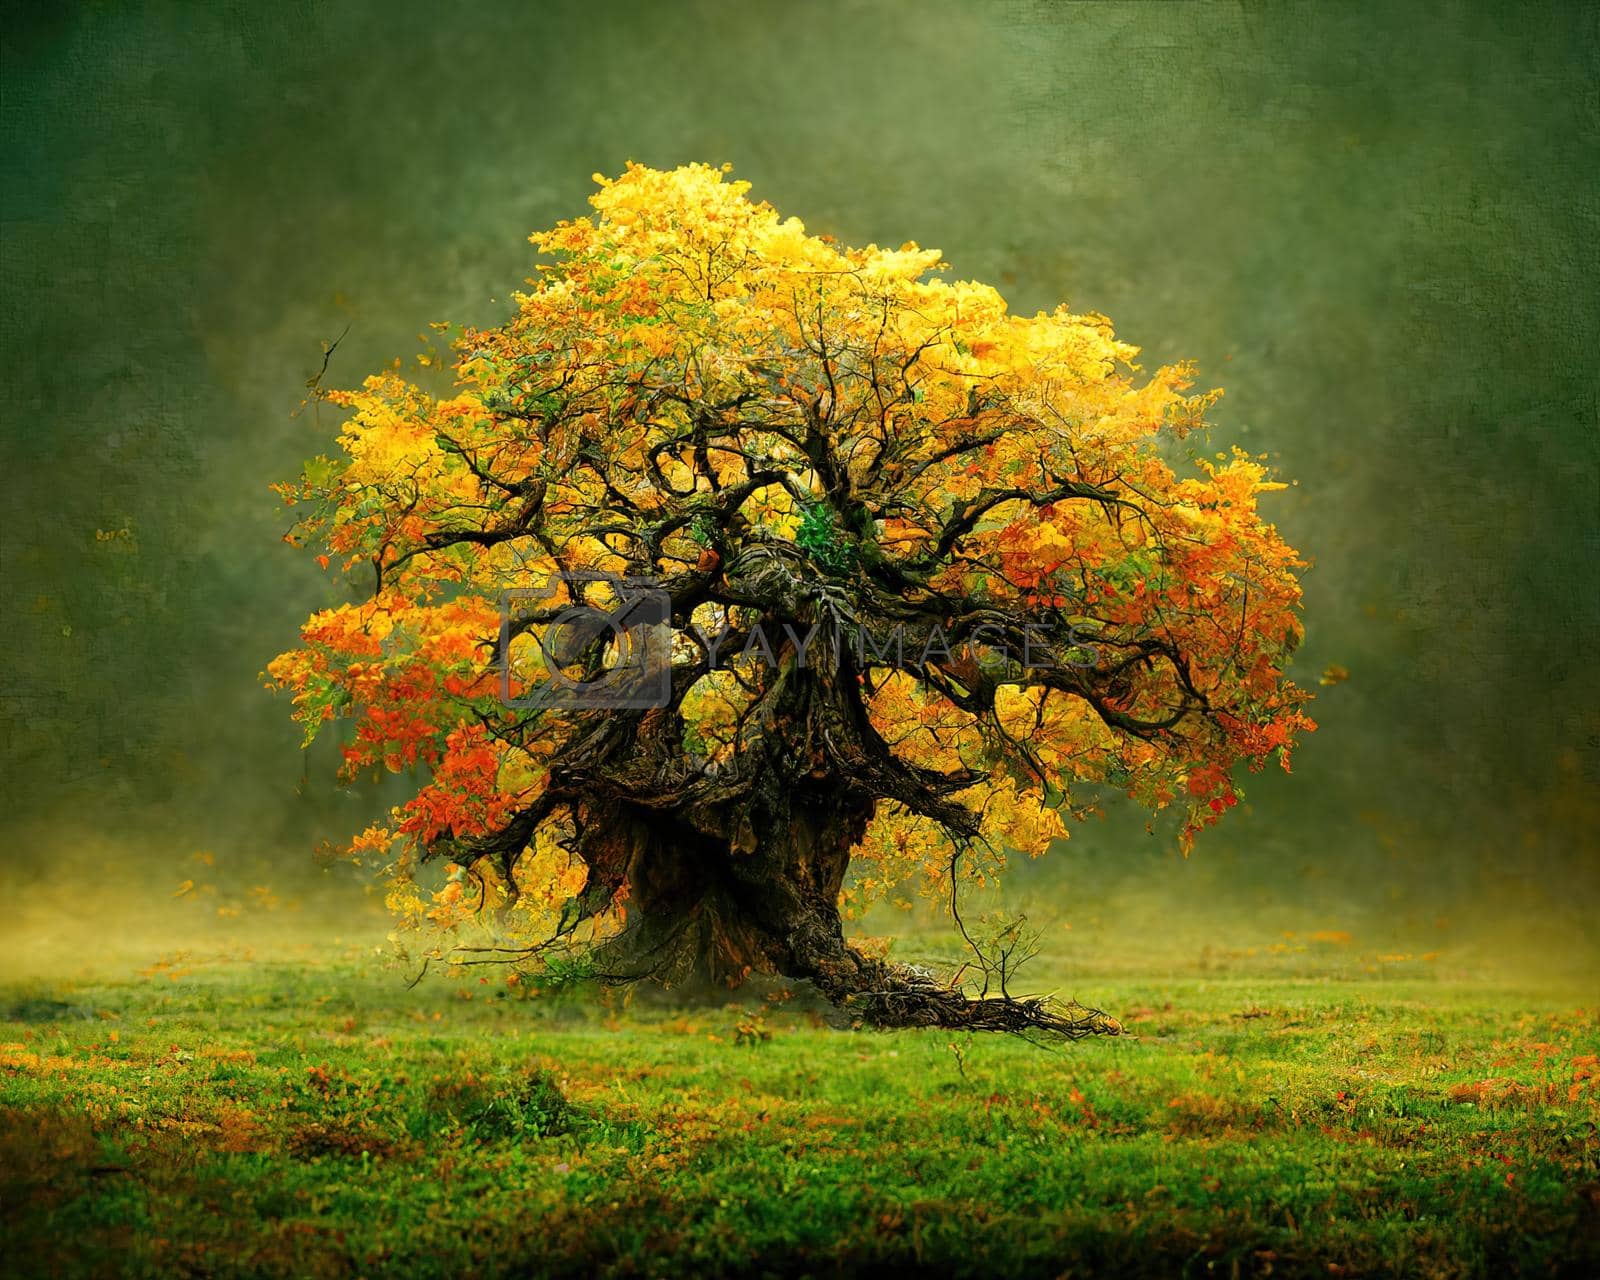 Royalty free image of Digital art of old big tree with amazing branches, 3d illustration by Farcas